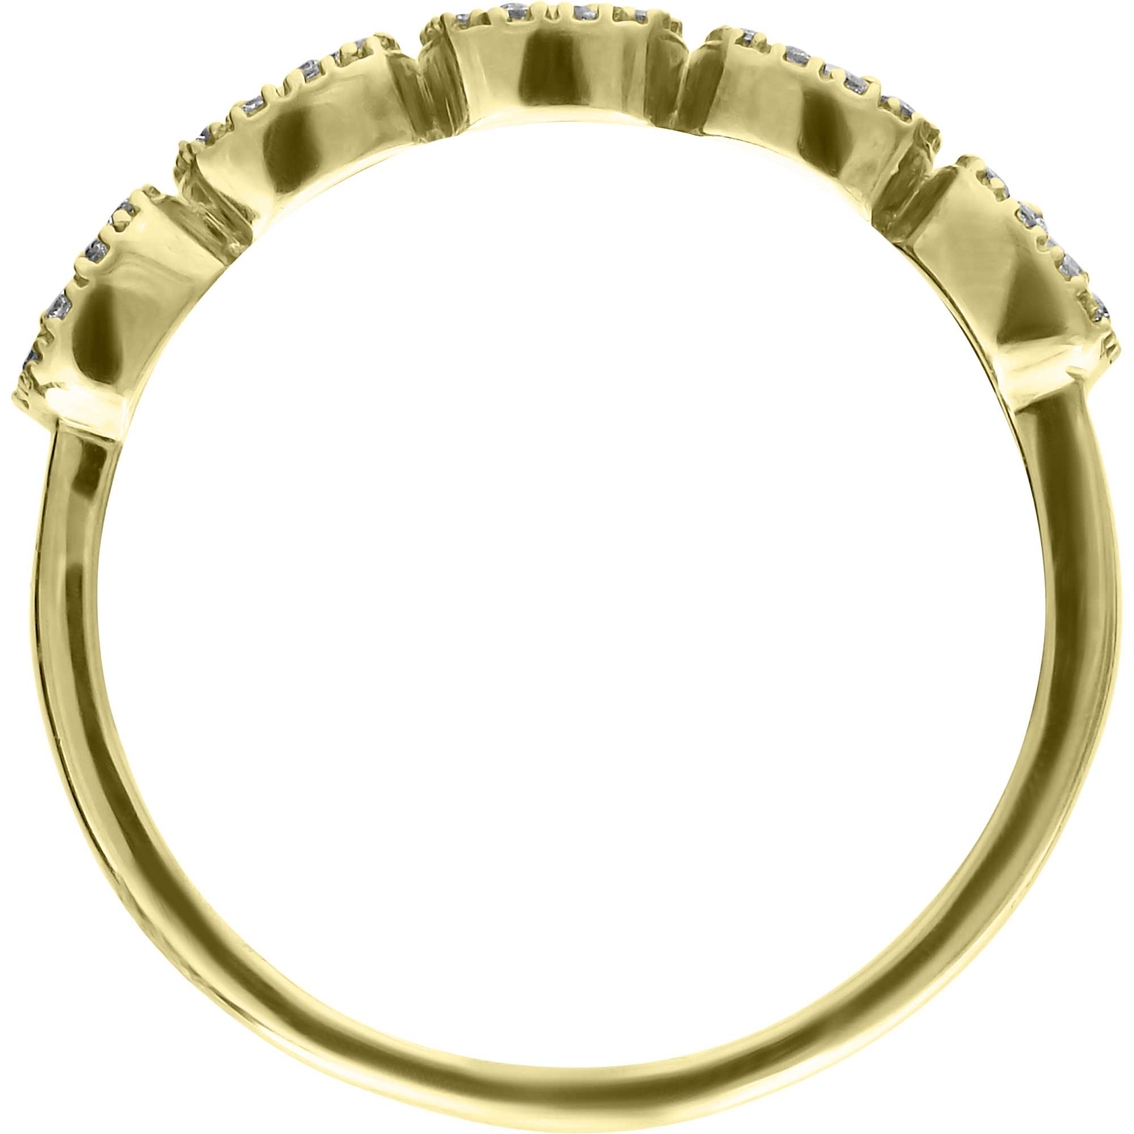 10K Gold 1/4 CTW Anniversary Band - Image 3 of 3